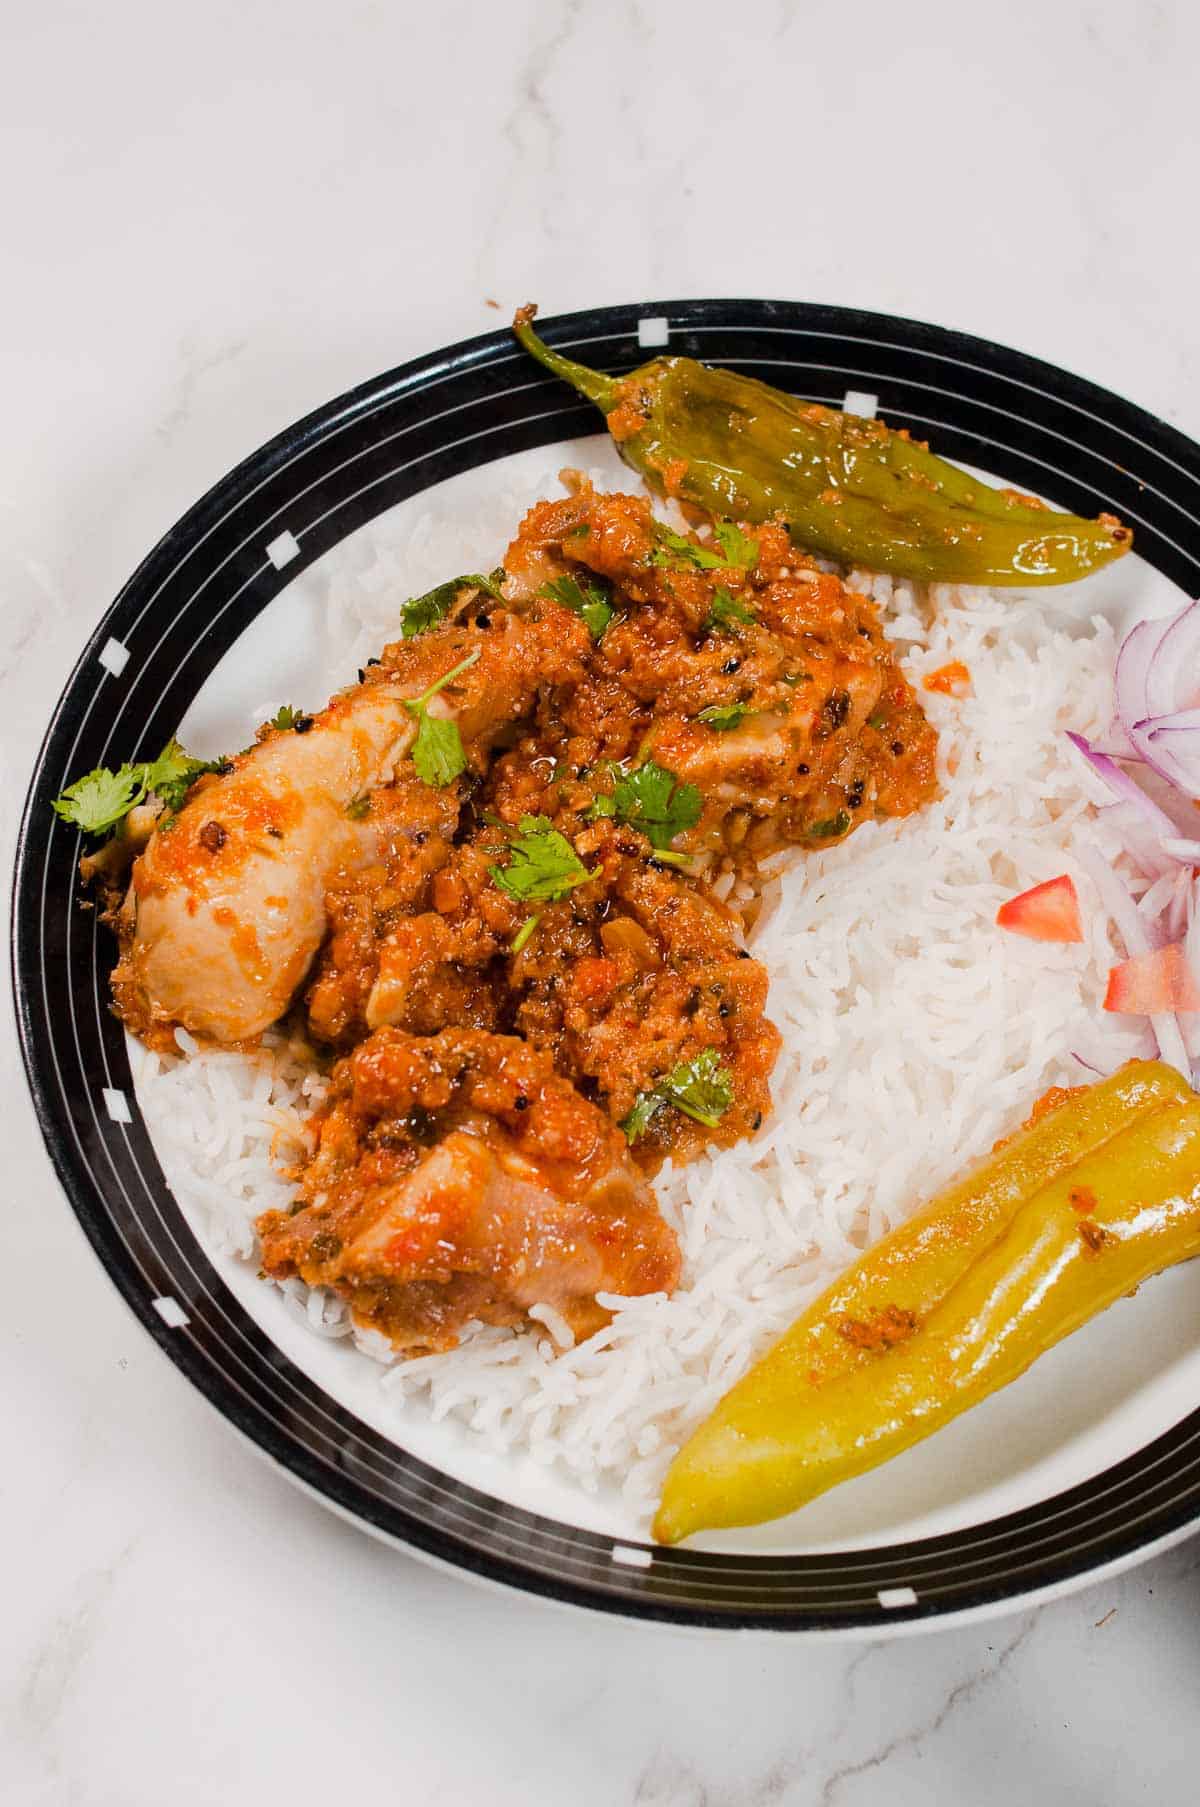 Achari chicken served with rice in a plate.